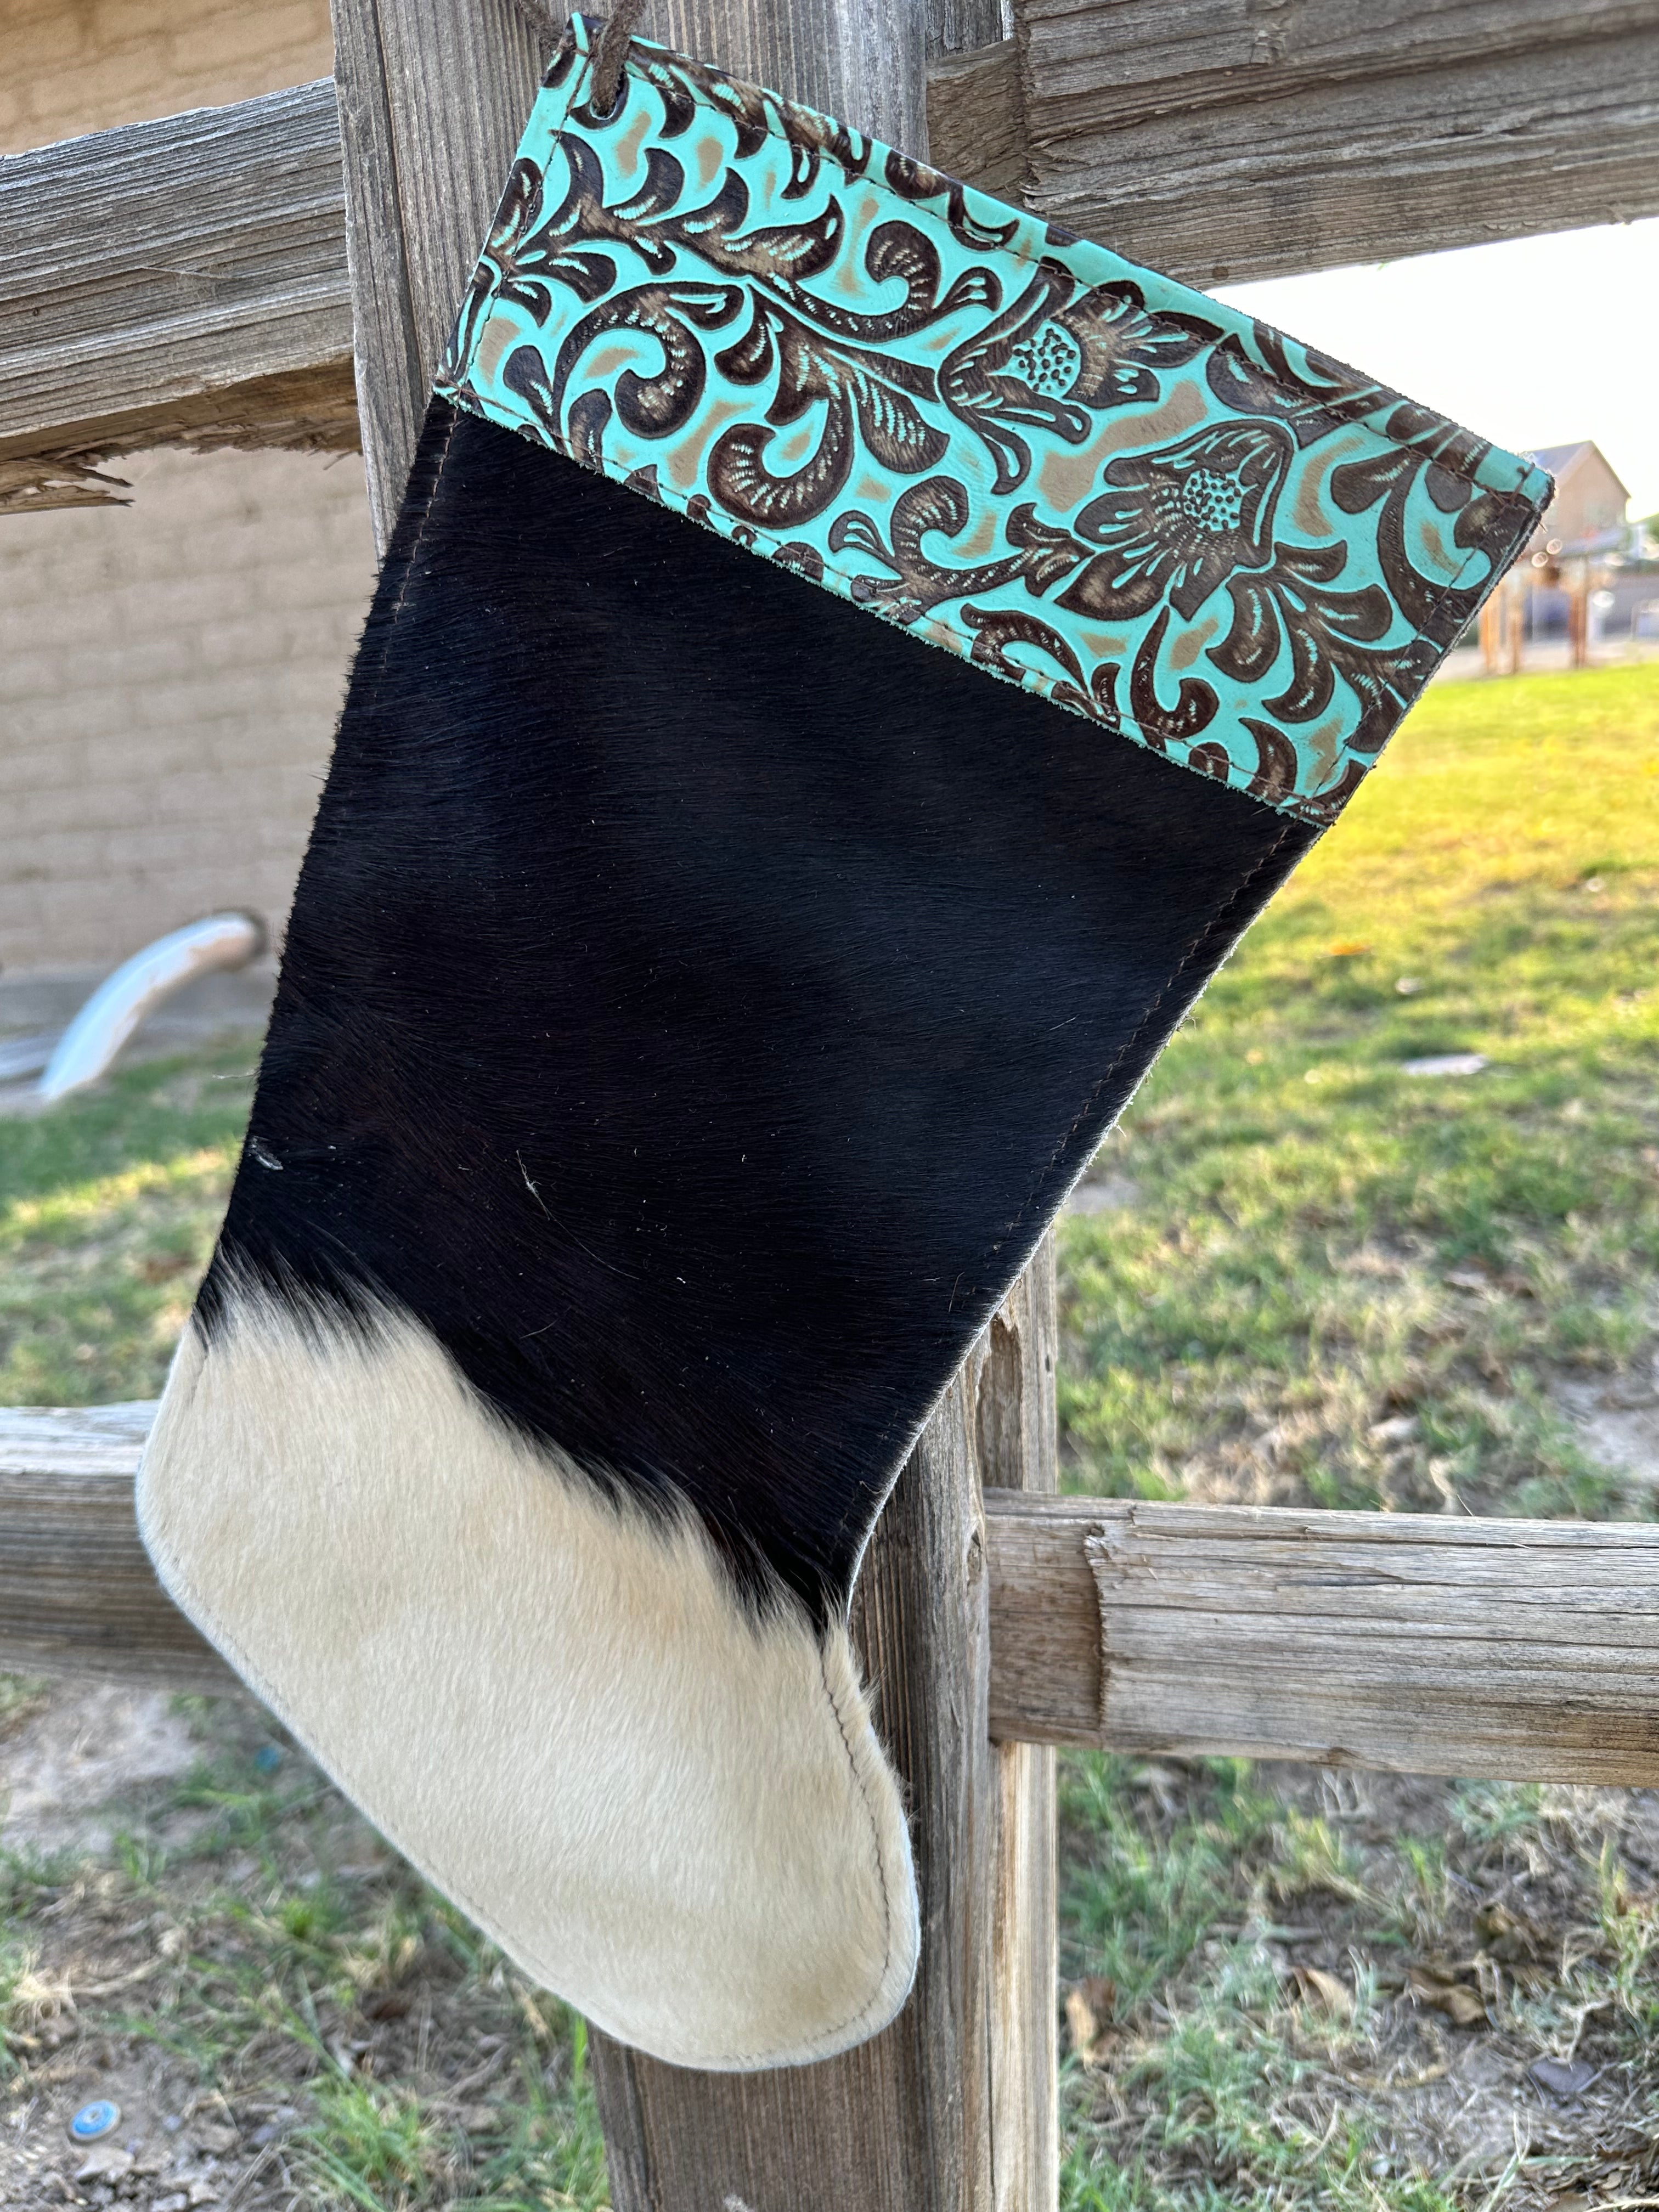 Genuine Tooled Leather Cowhide Stocking